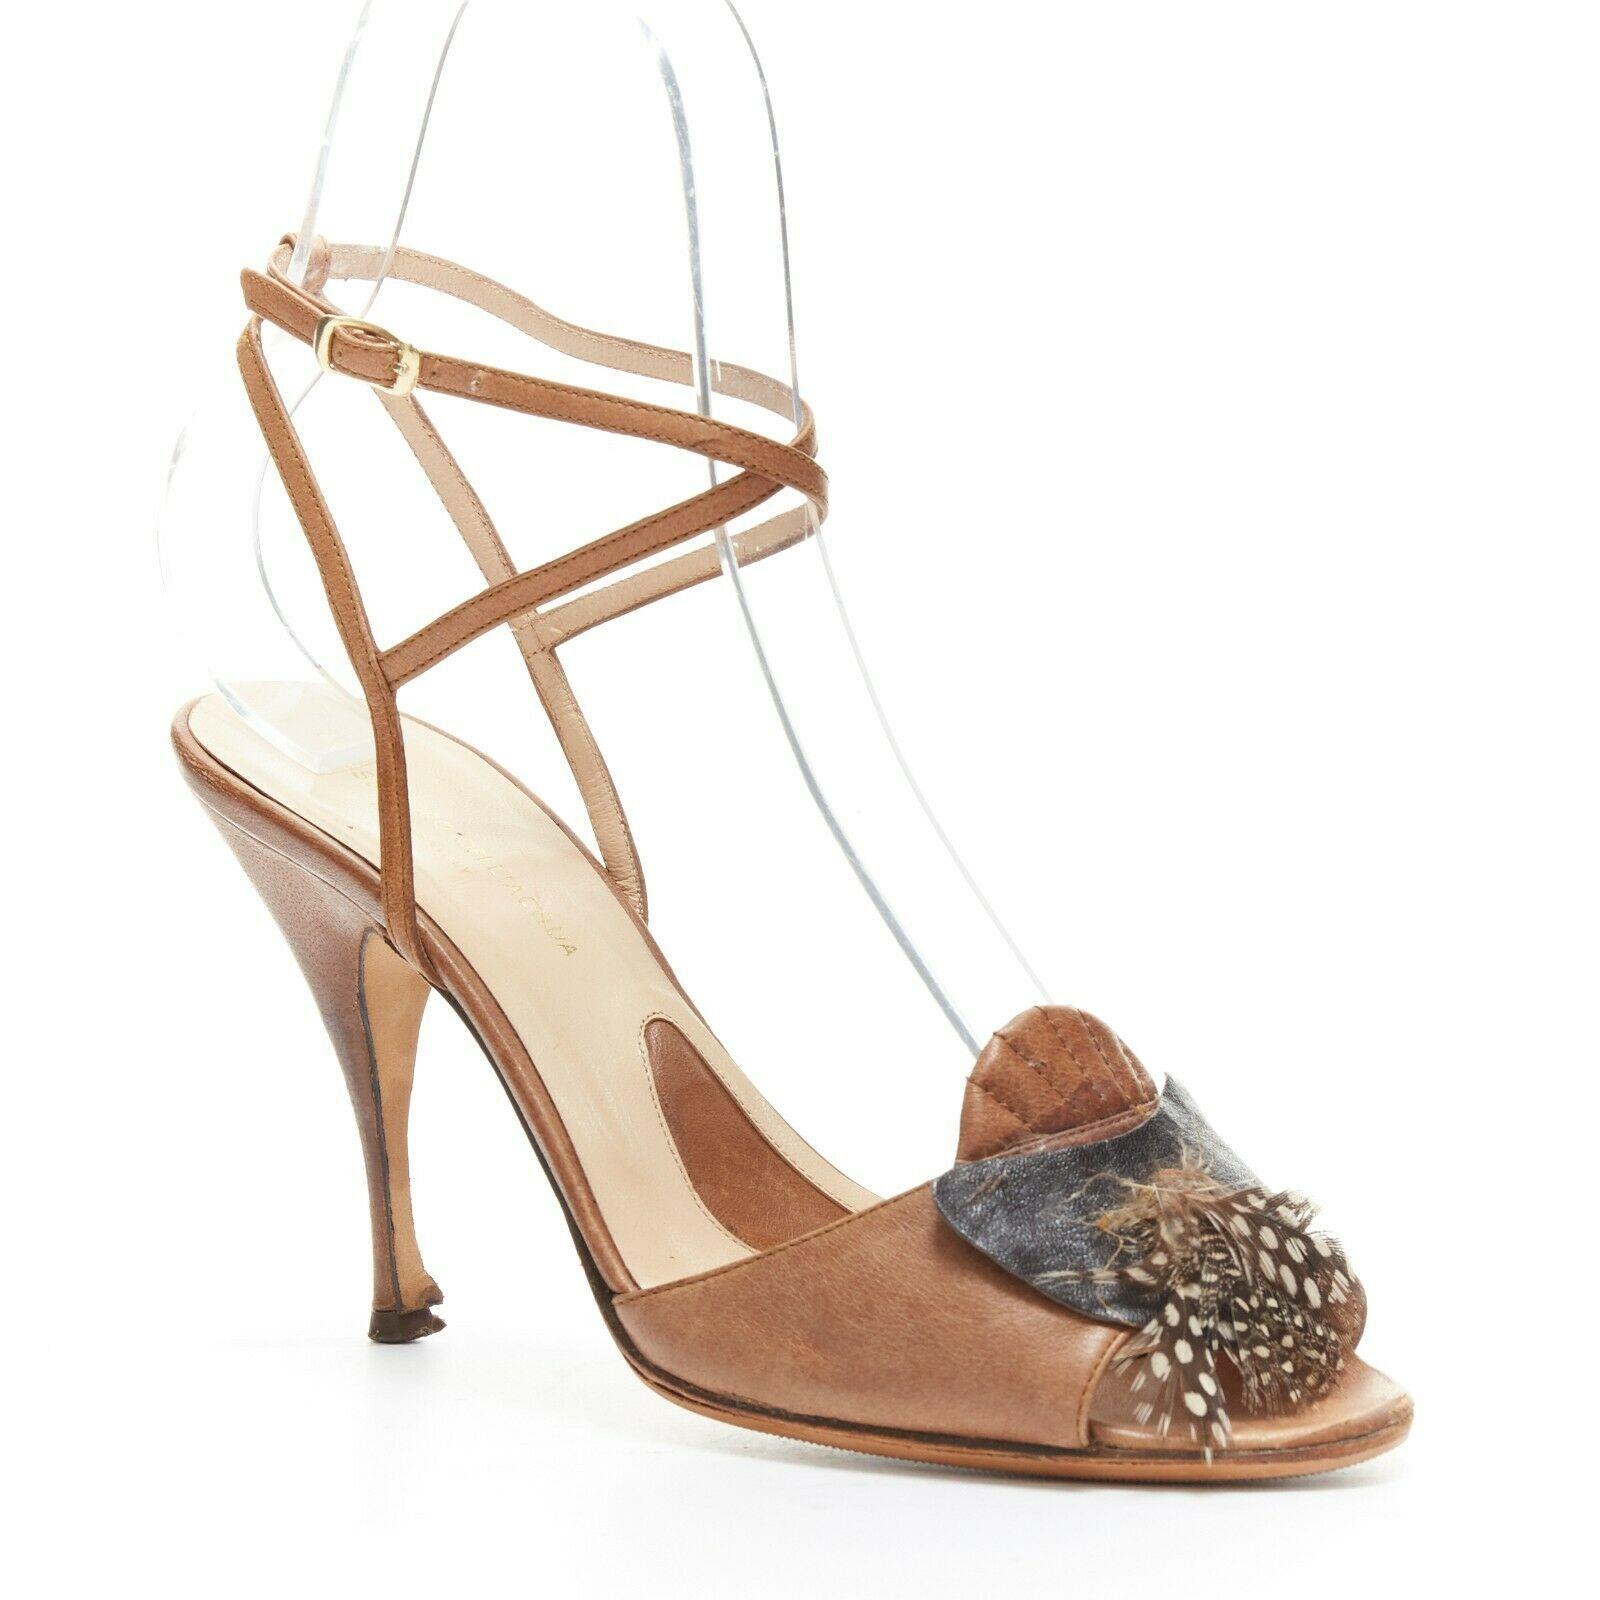 ALESSANDRO DELL ACQUA leather open-toe high heel sandal exotic bird feather EU37 
Reference: EACN/A00087 
Brand: Alessandro Dell'Acqua 
Material: Leather 
Color: Brown 
Extra Detail: Brown calfskin leather. Open toe strappy sandals. Exotic bird